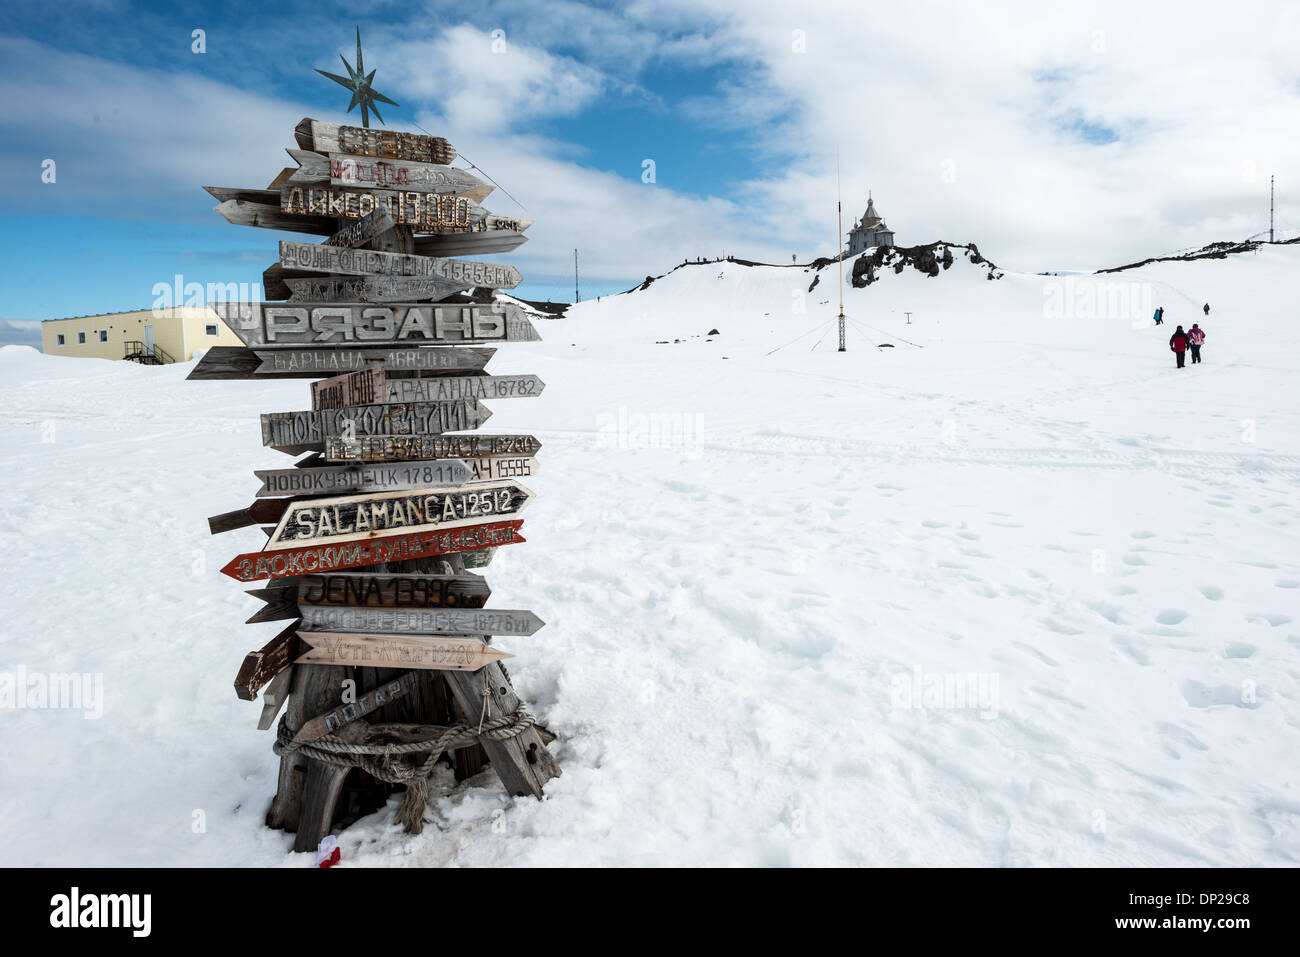 ANTARCTICA - Signposts in Russian point to world destinations and their distance from Bellingshausen Station research base on King George Island in the South Shetland Islands. In the background at right is Trinity Church. Stock Photo